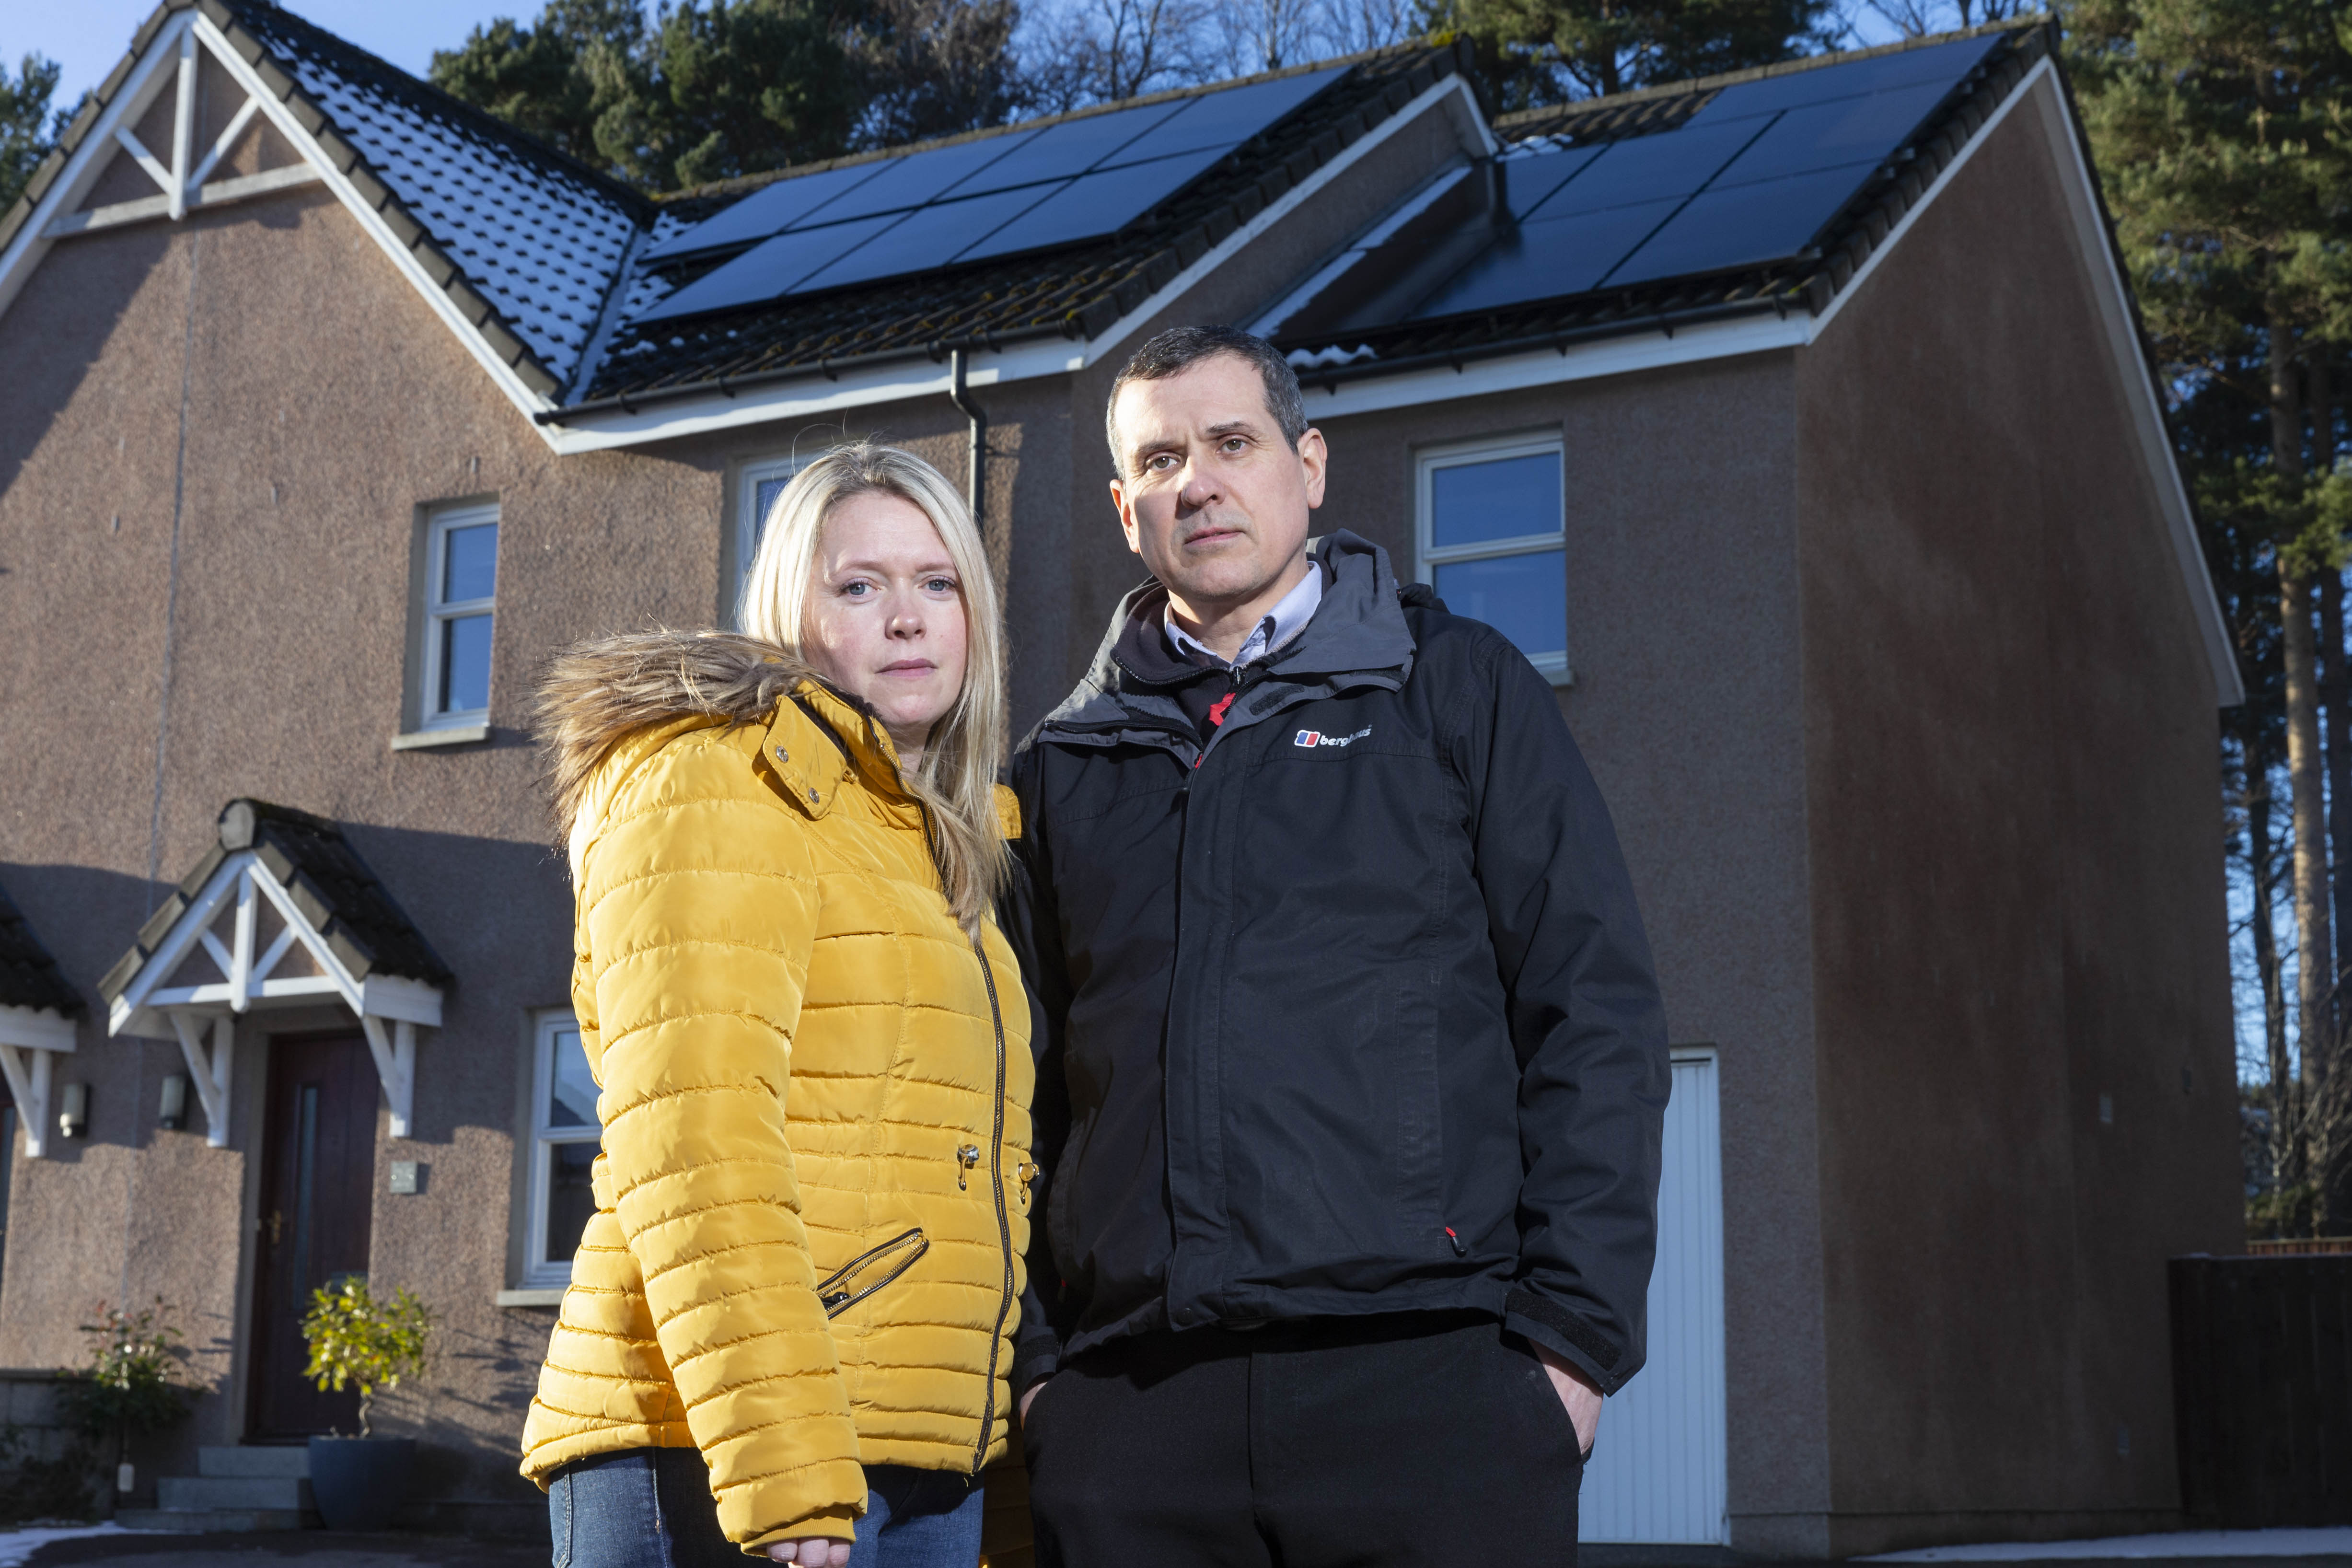 Kevin Tracy, who bought some solar panels and has had trouble with the installers. (Ross Johnstone/Newsline Media)